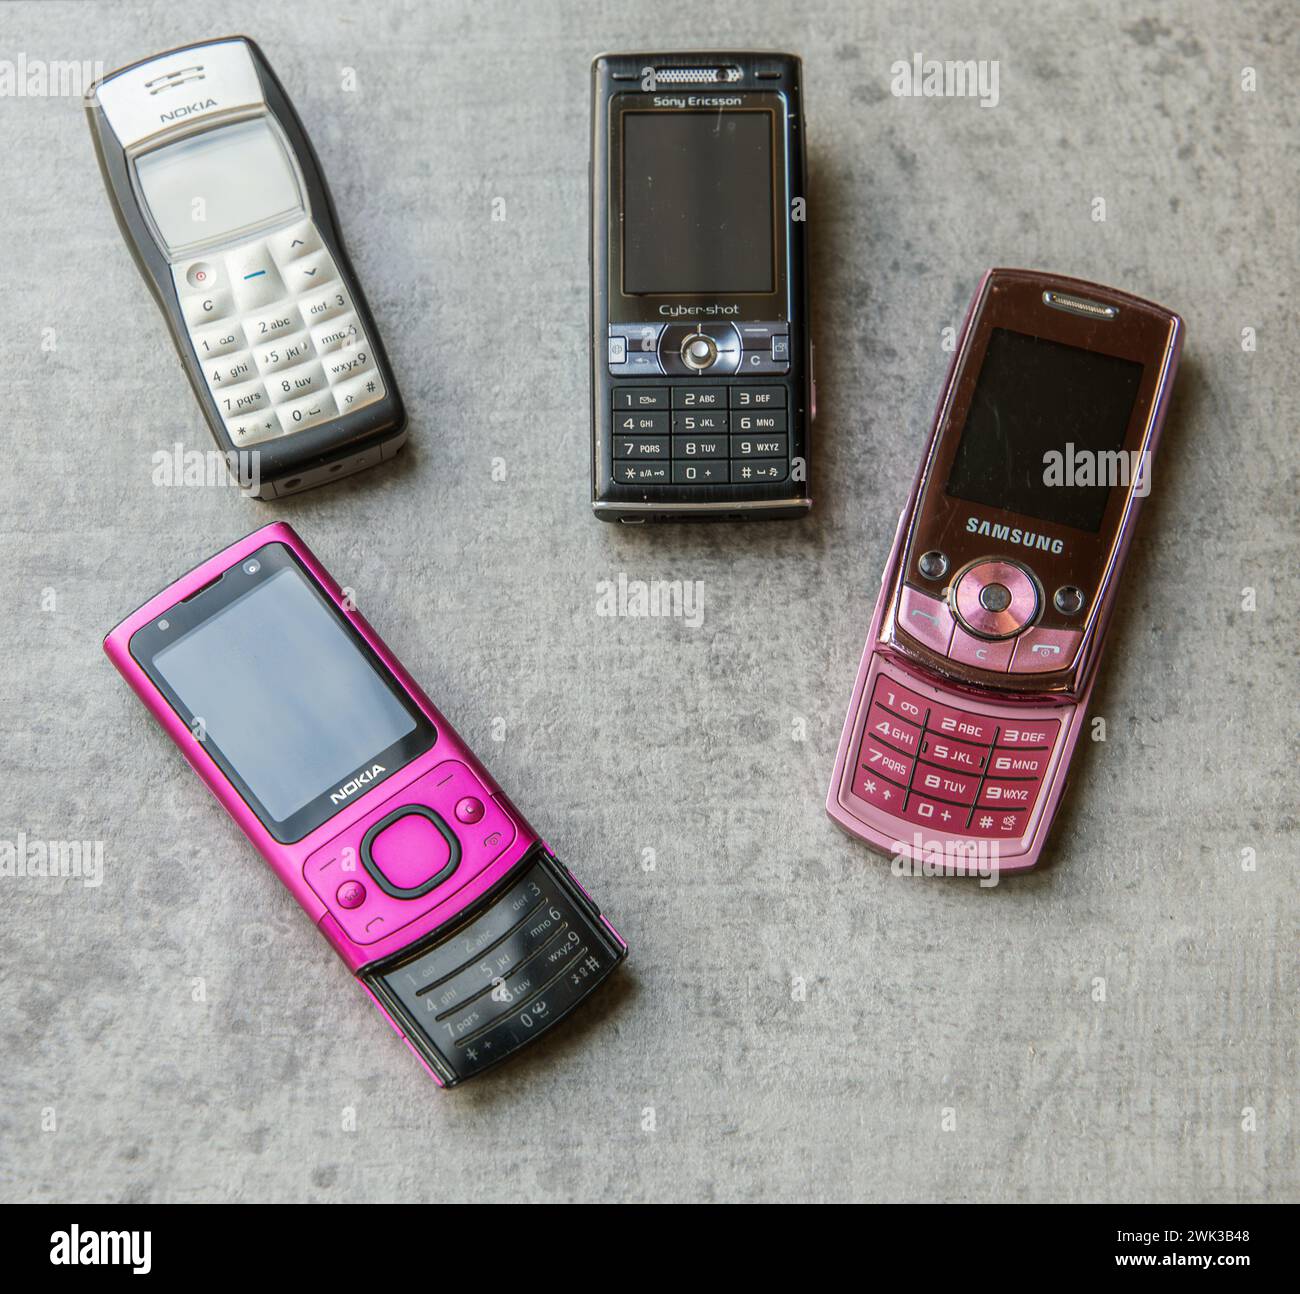 Vintage collection of old mobile phones from different brands on a concrete background Stock Photo